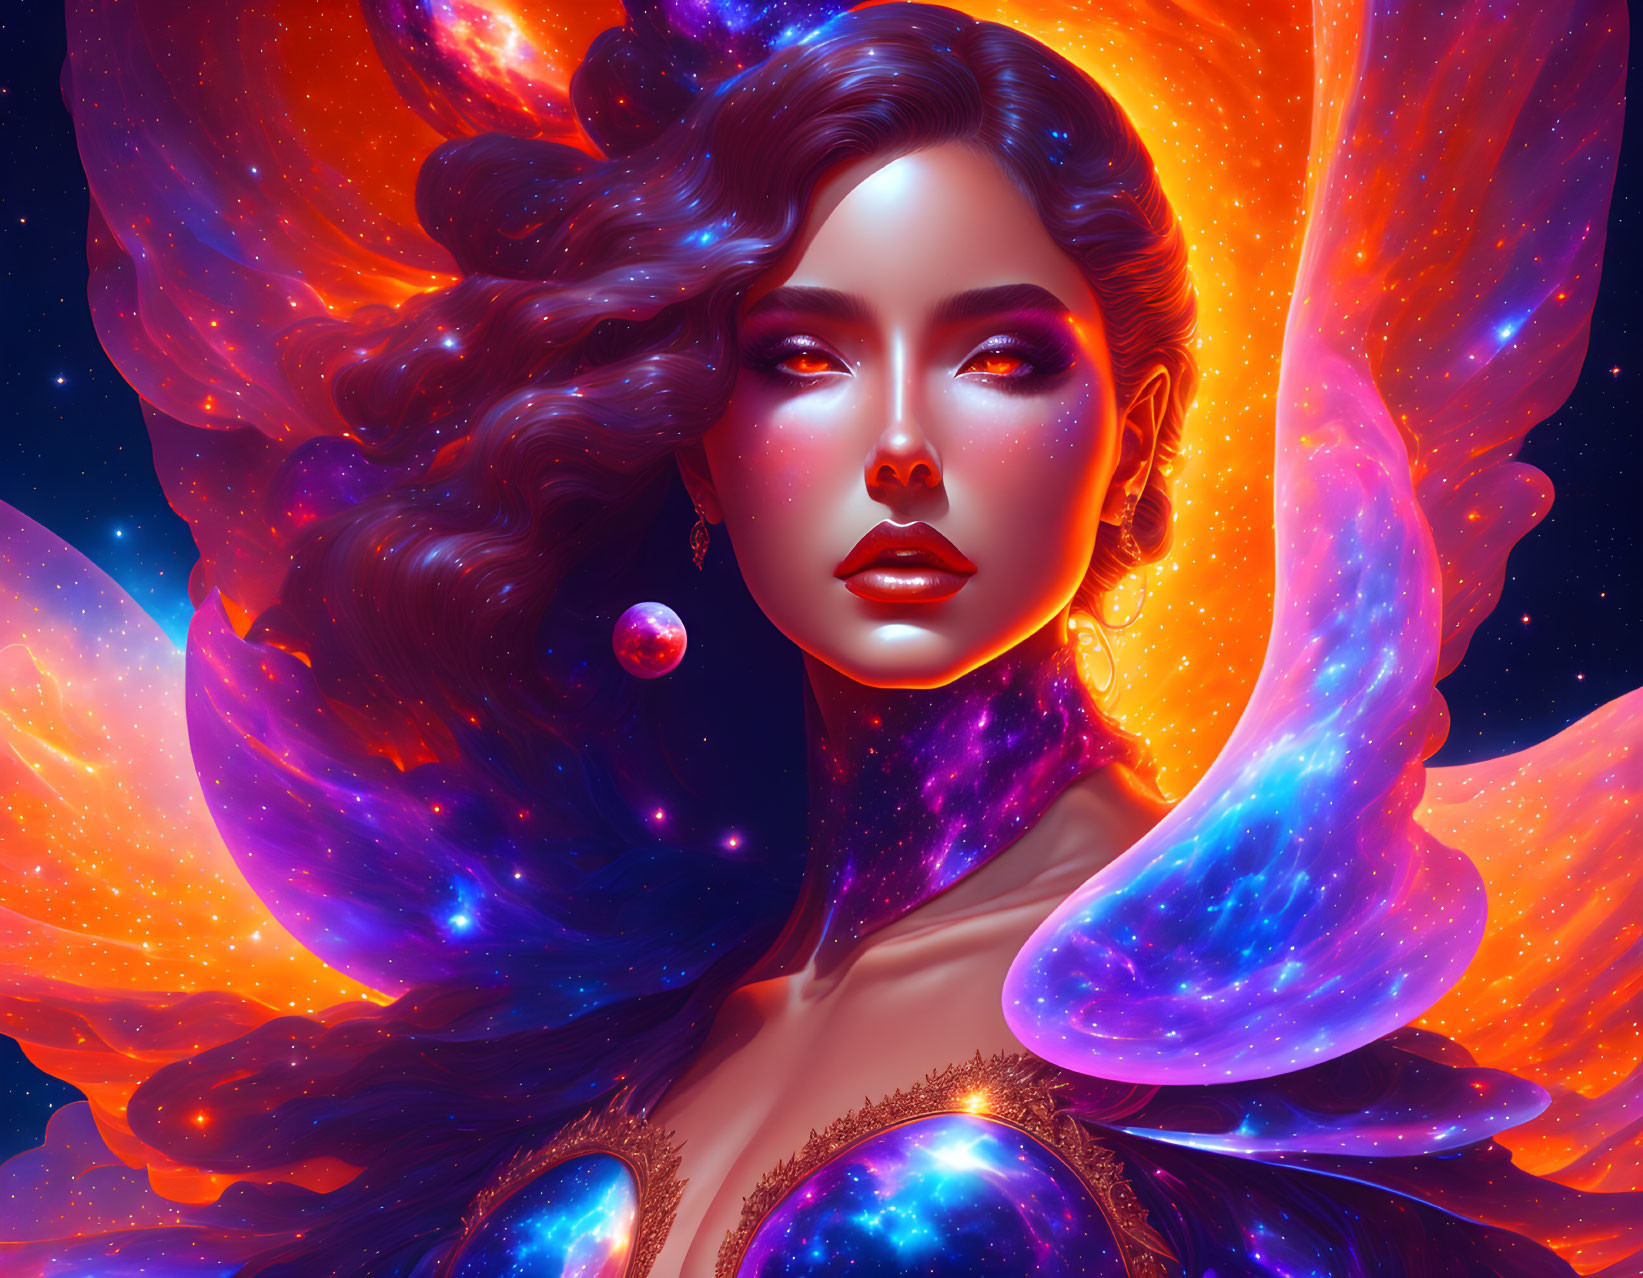 Cosmic-themed woman surrounded by stars and nebulae